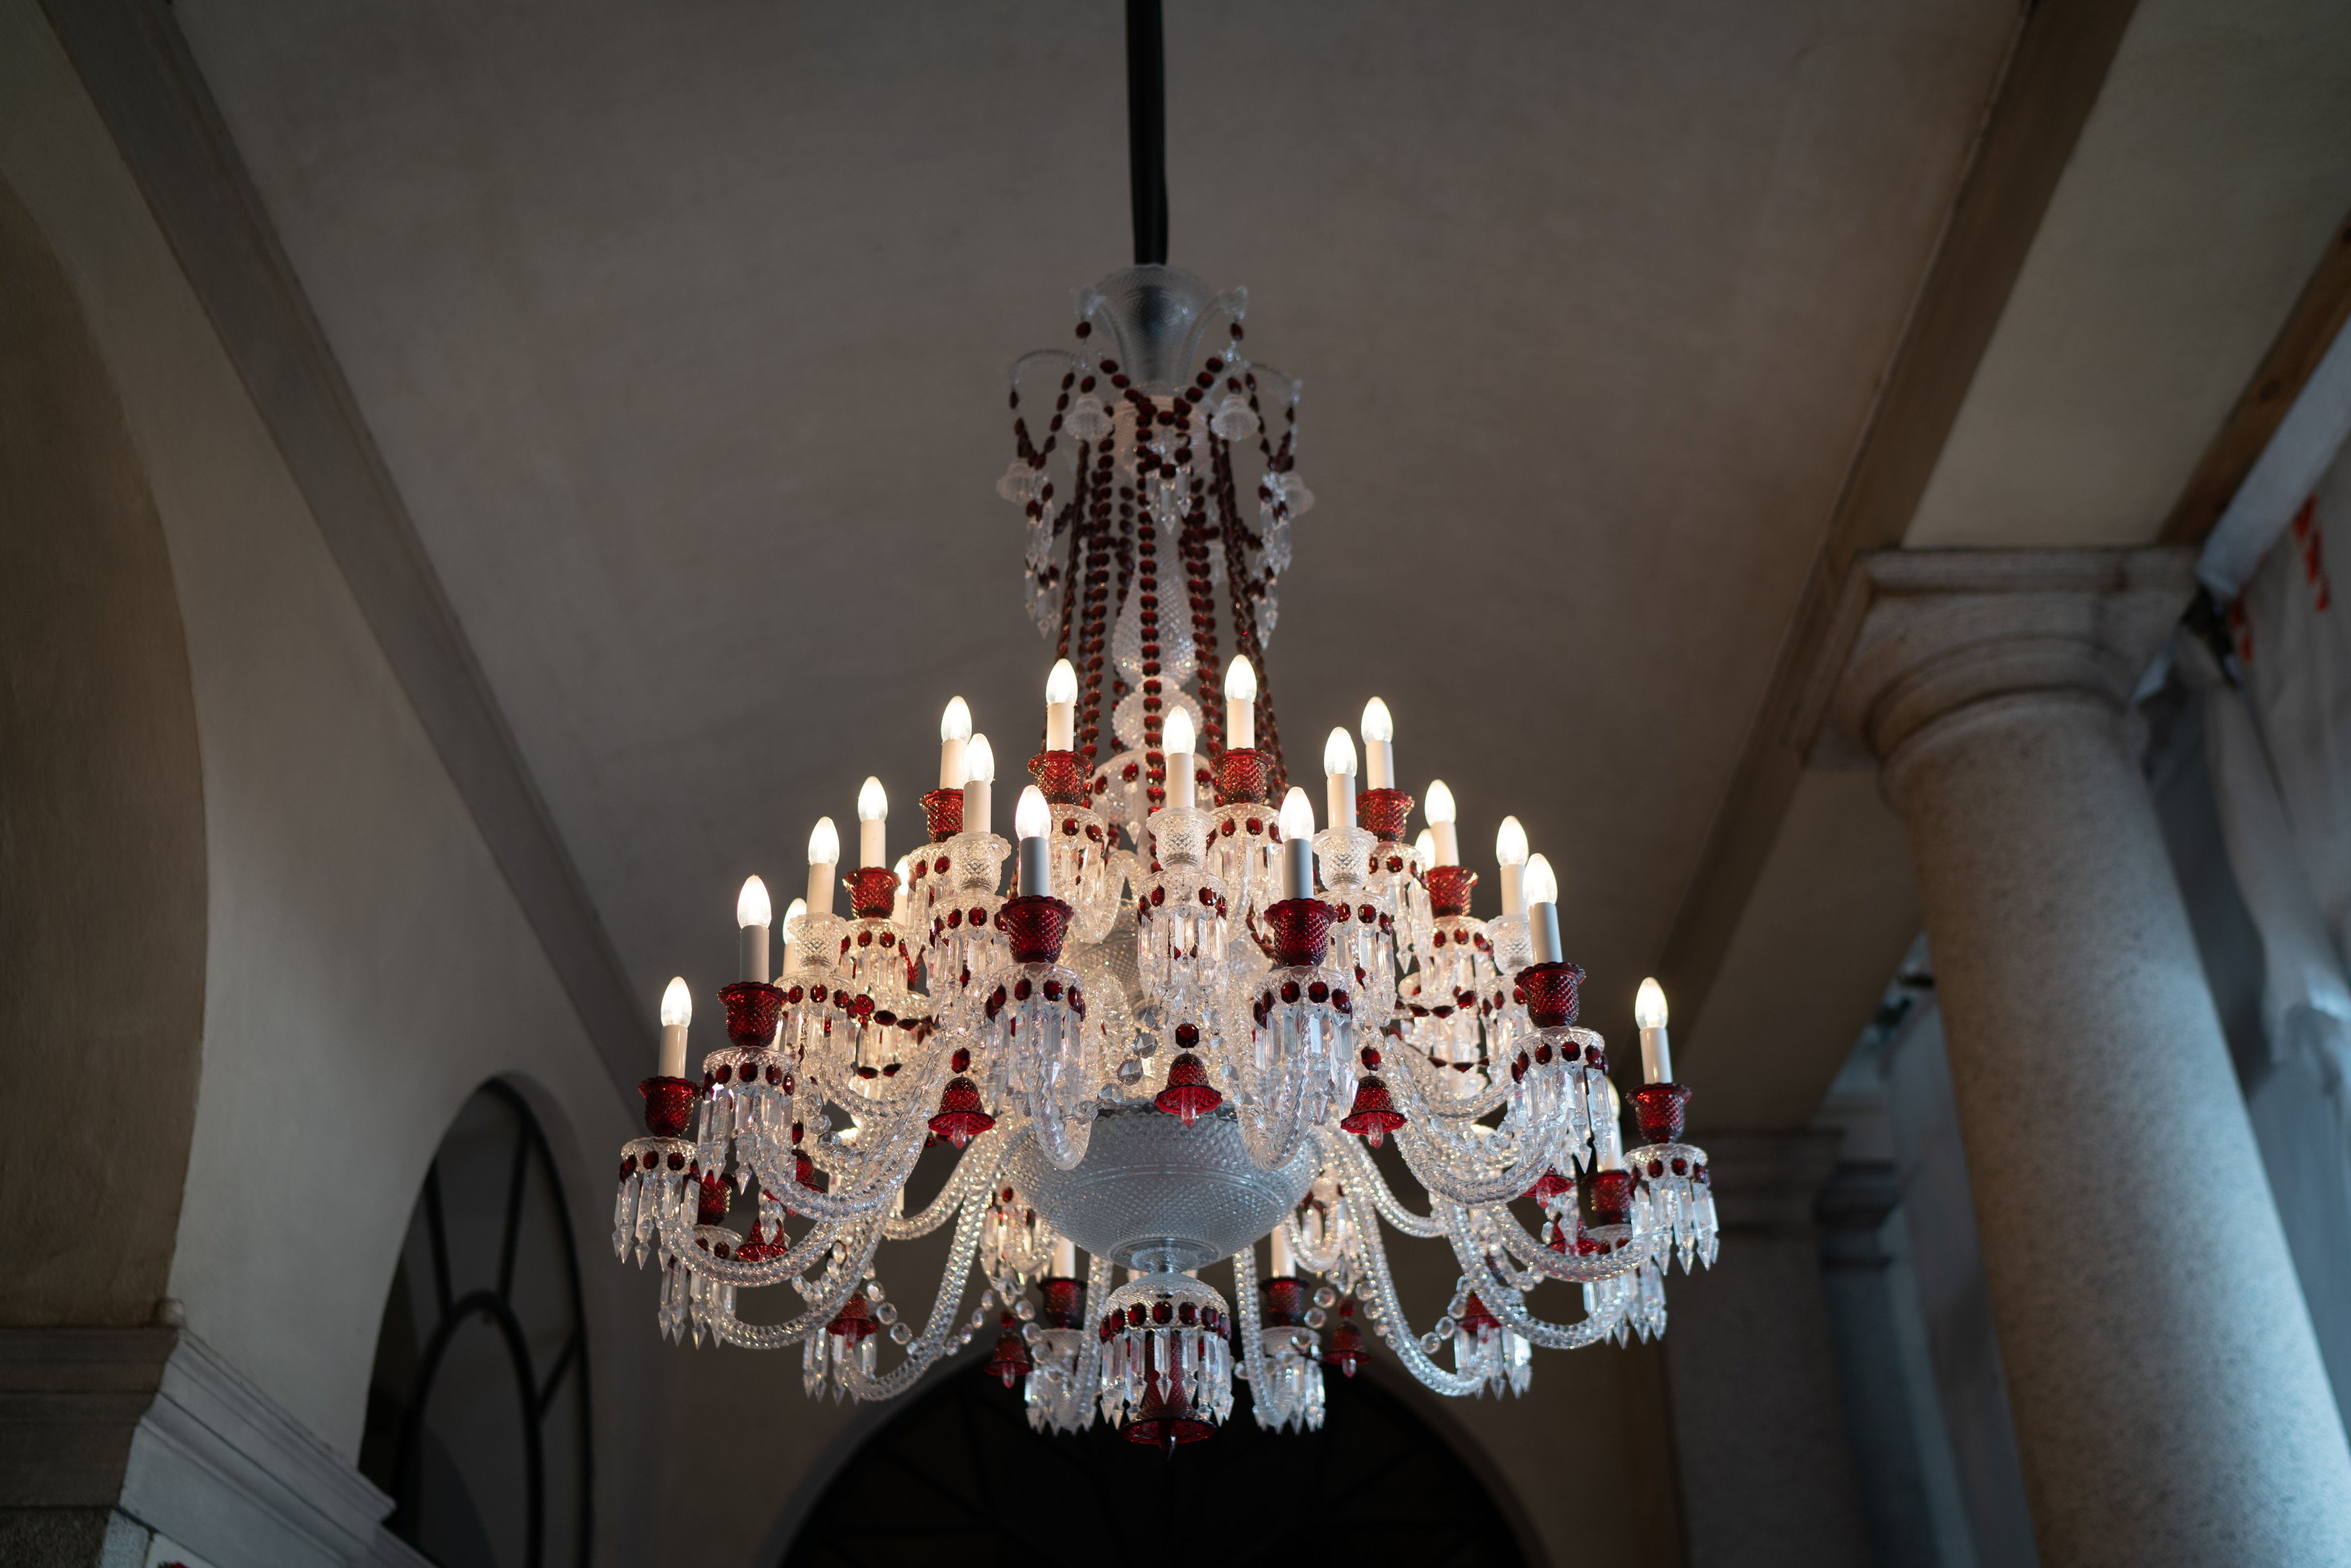 Baccarat on Twitter: "Over 255 years of never settling for the ordinary.  ⠀⠀⠀⠀⠀⠀⠀⠀⠀ Seen at the #BaccaratMontenapoleone Boutique, BBar &amp; Lounge  Montenapoleone, 23 20121 Milan - Italy #Baccarat #Crystal #Legendary  #Chandelier #ViaMontenapoleone